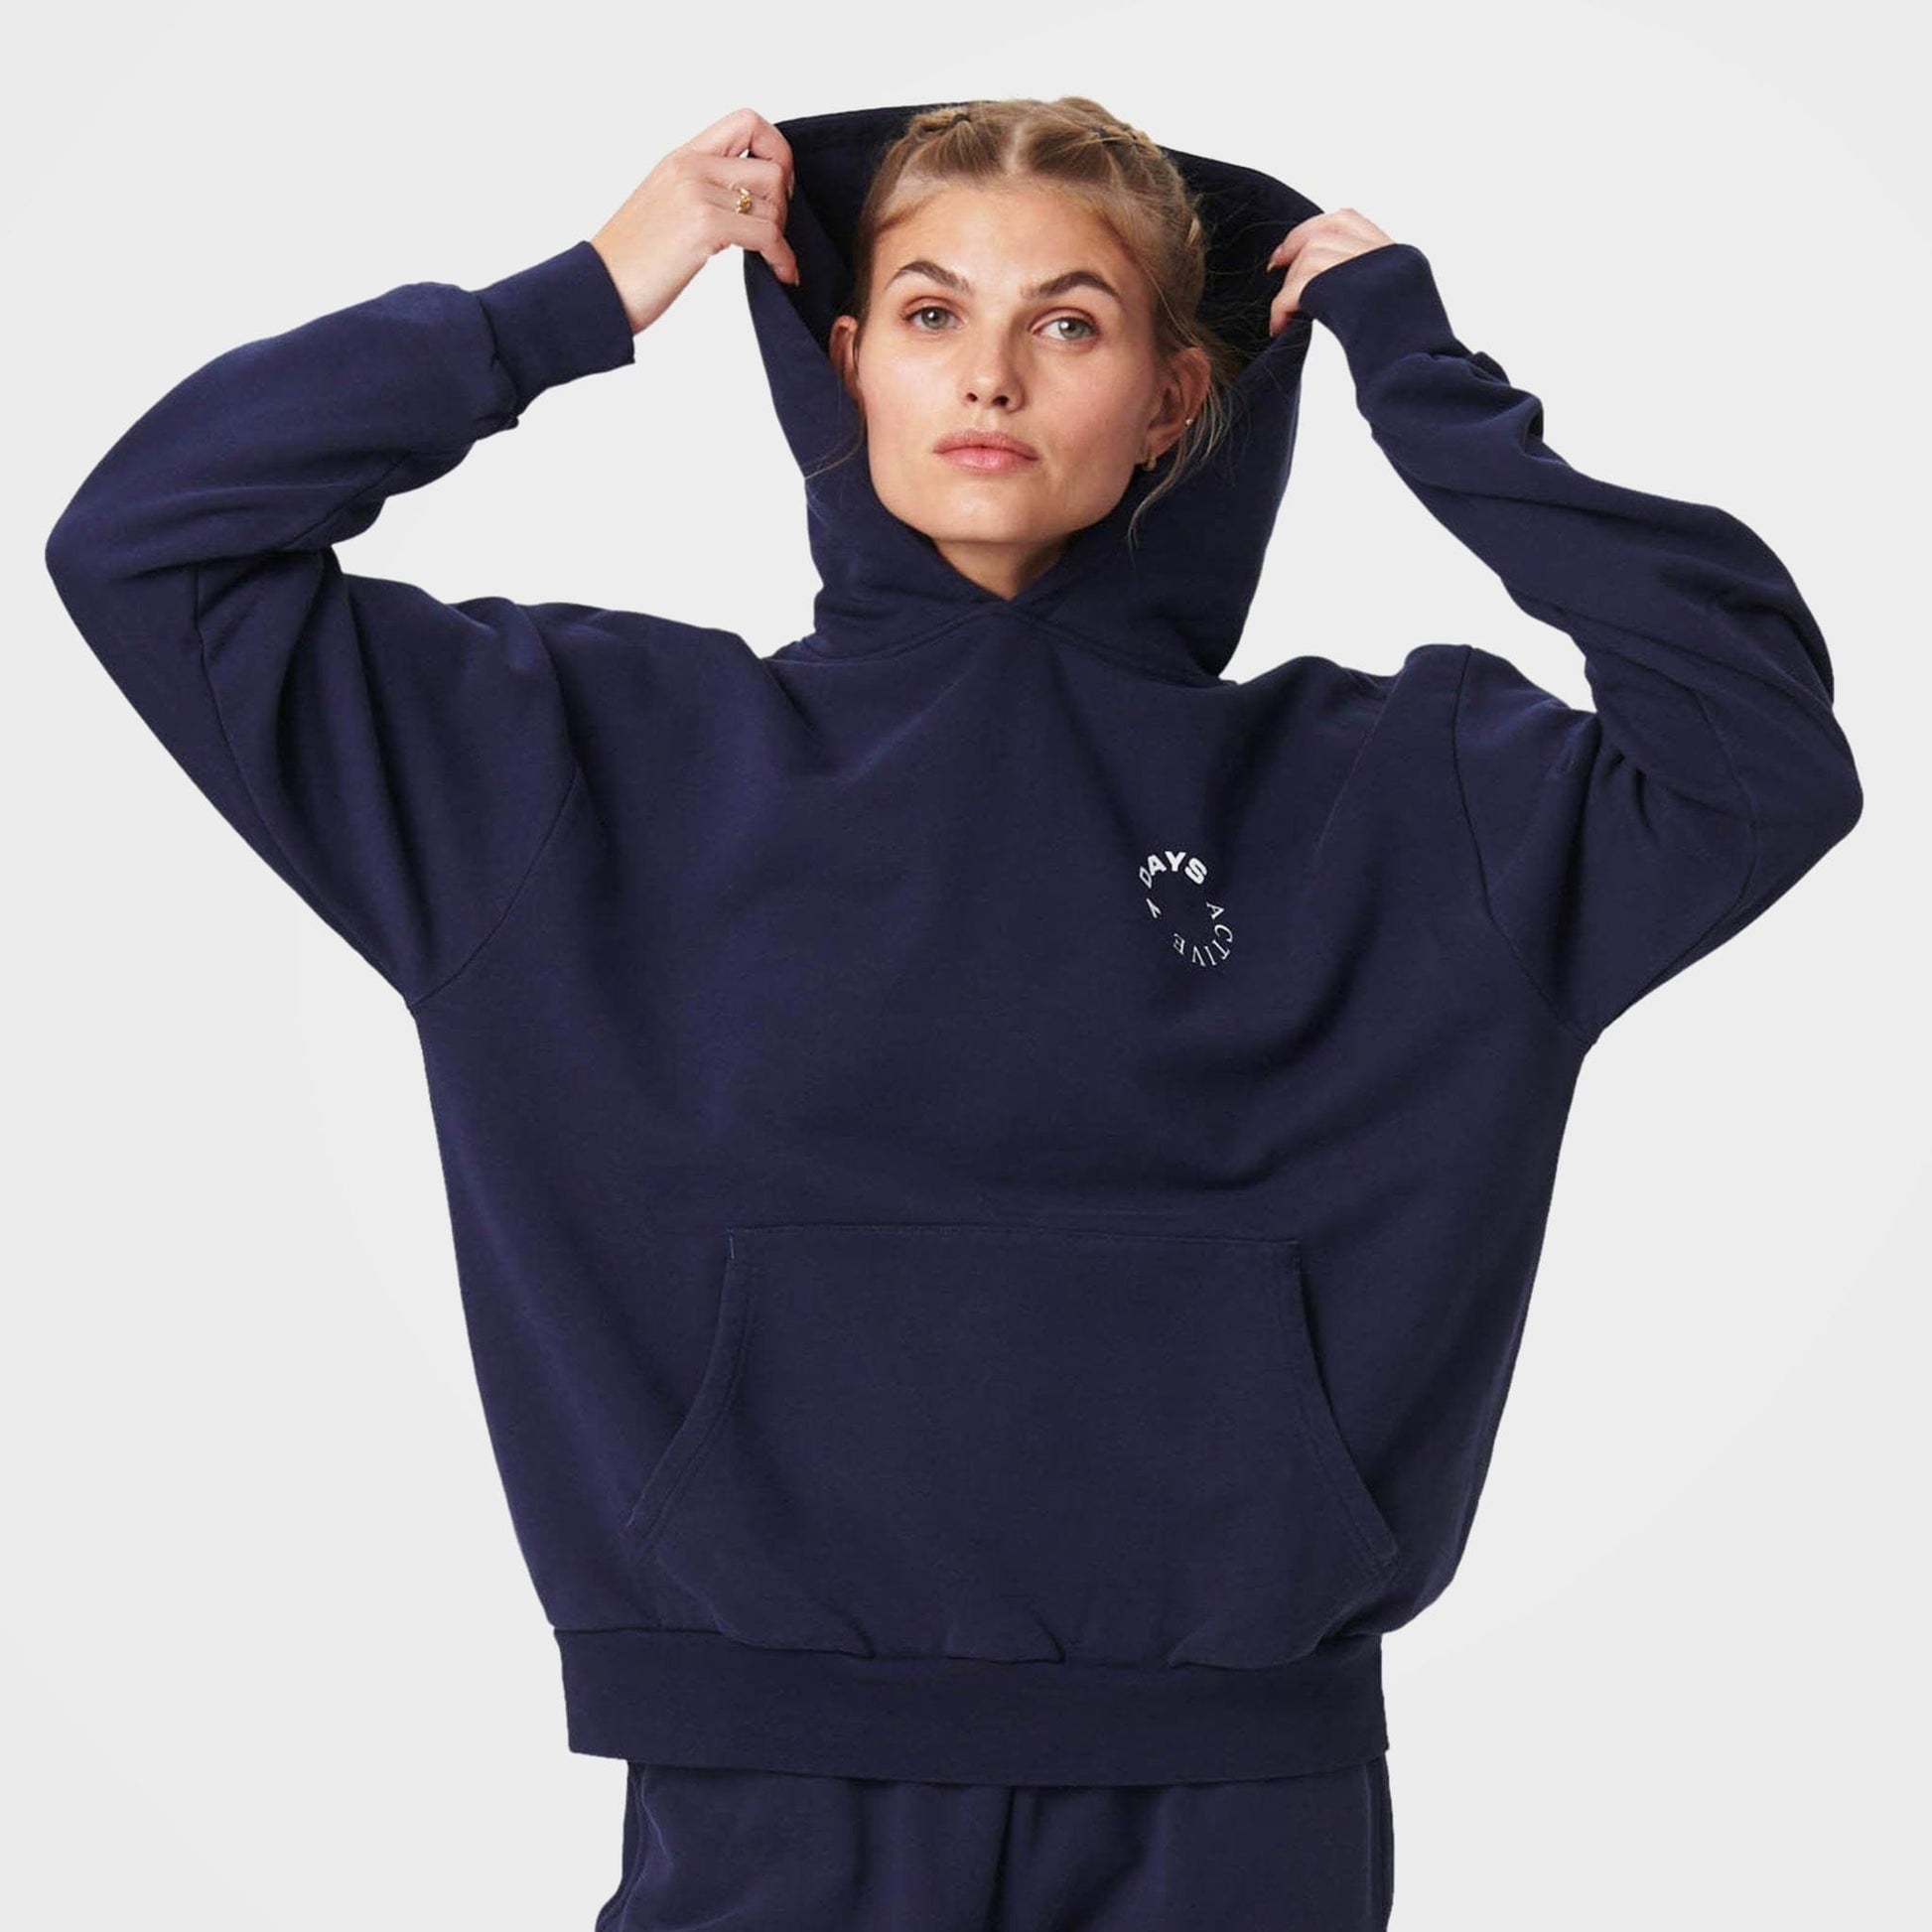 Navy Organic Cotton Hoodie by 7Days Active